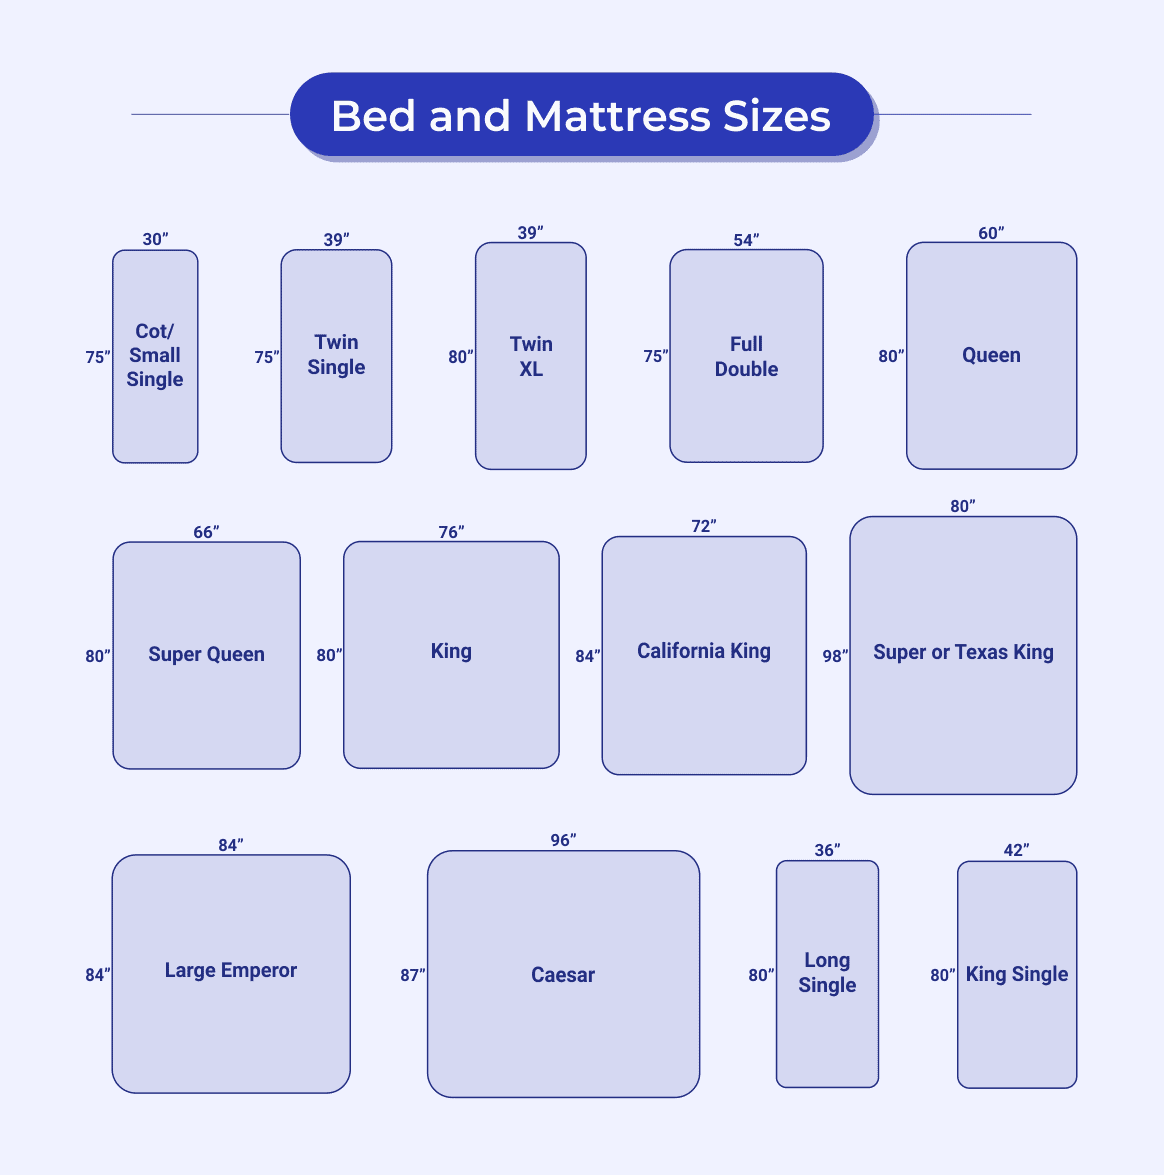 Mattress And Bed Sizes What Are The, What Are The Measurement Of A King Size Bed